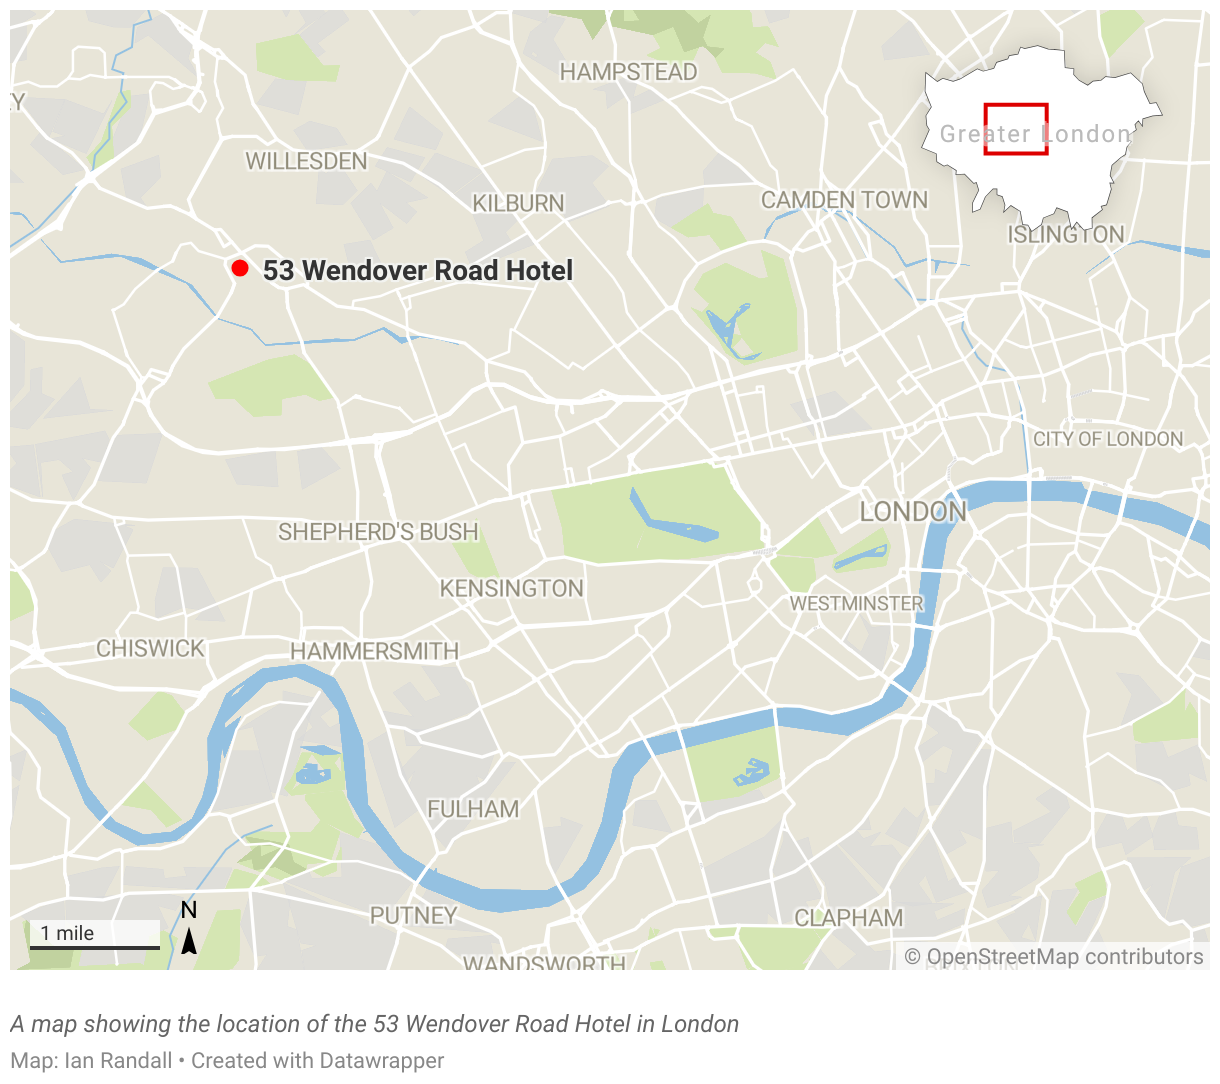 A map showing the location of the 53 Wendover Road Hotel in London